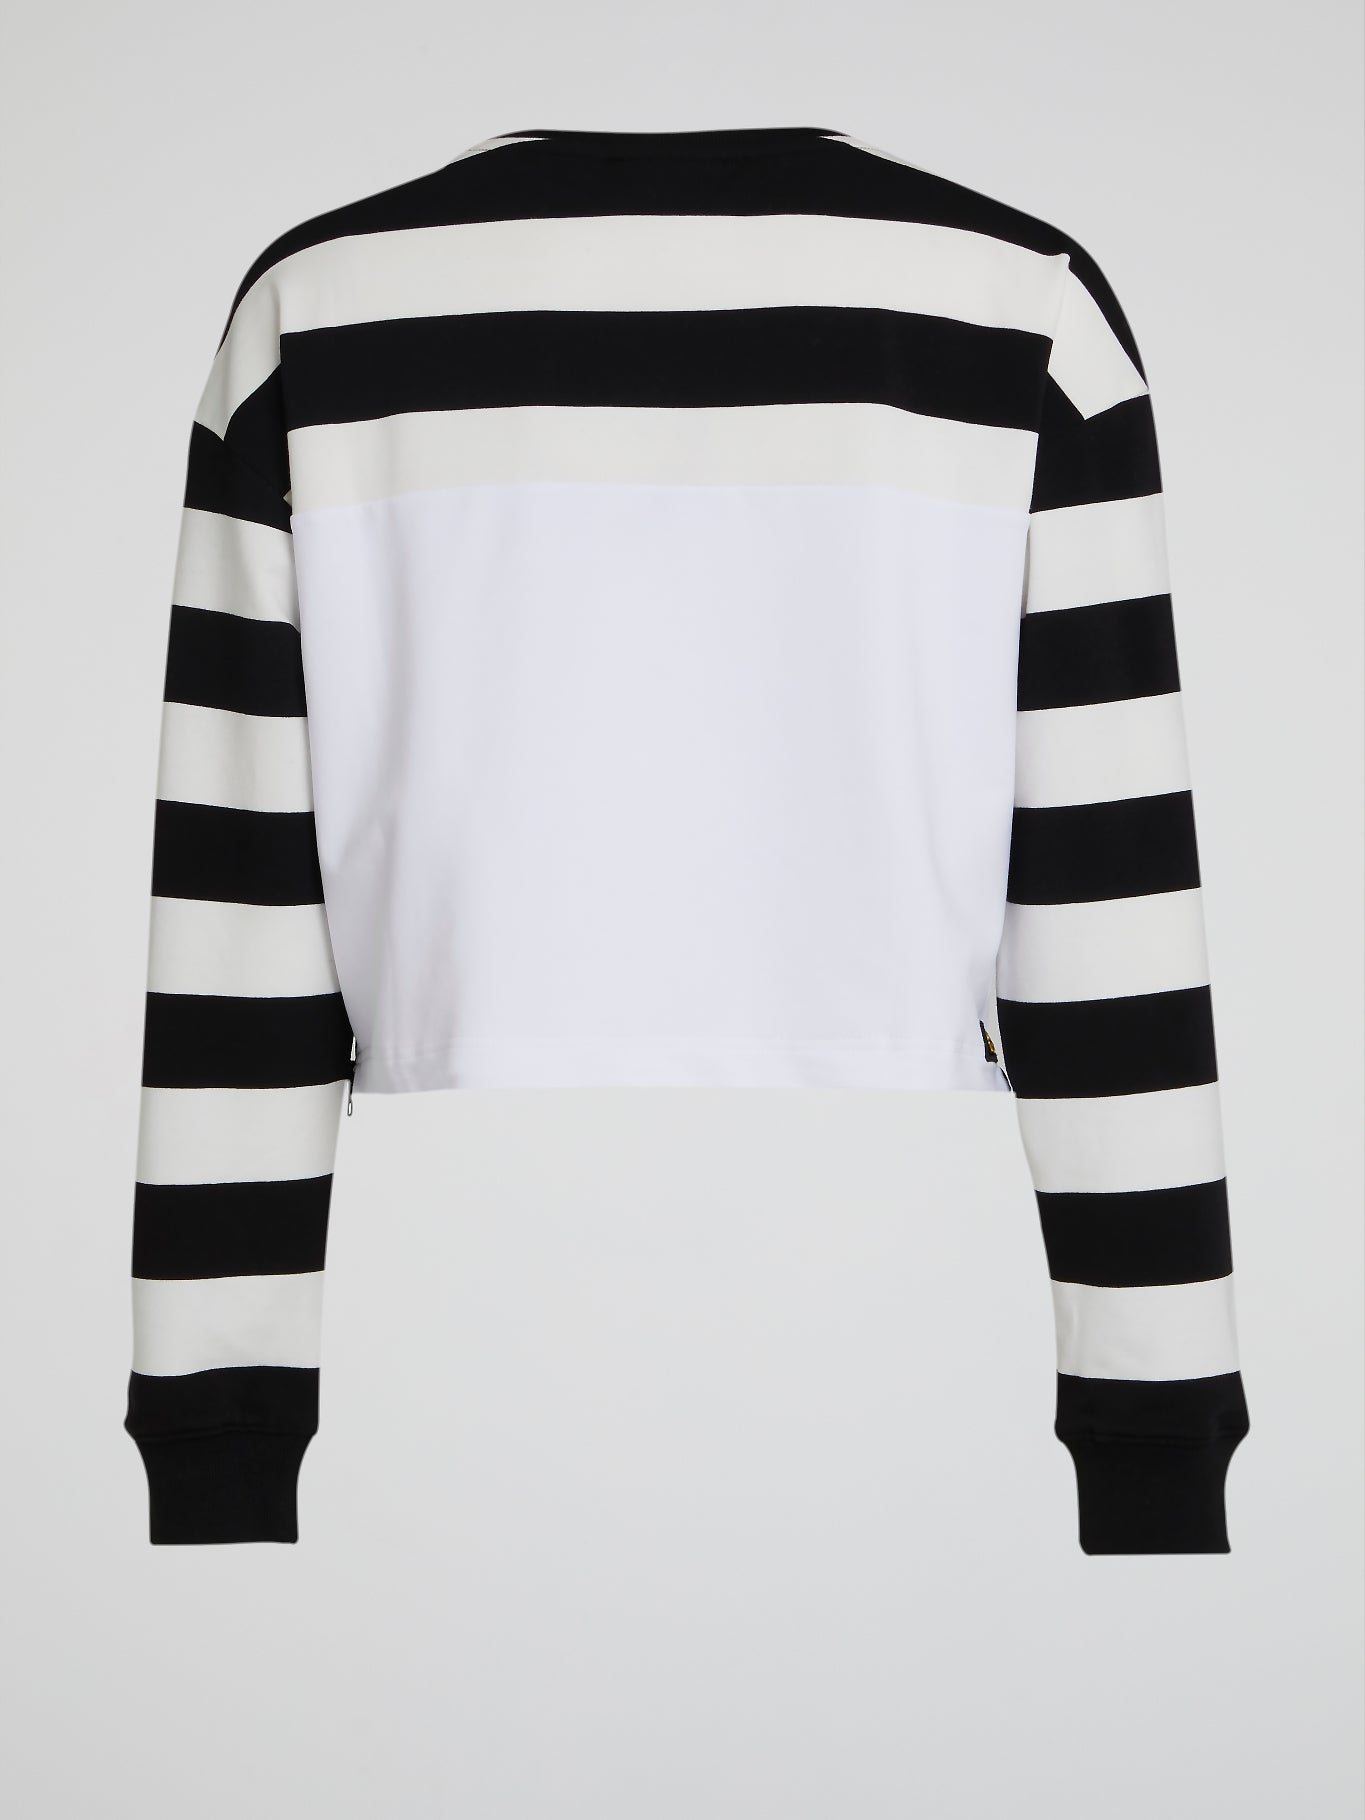 Amour Striped Crop Top